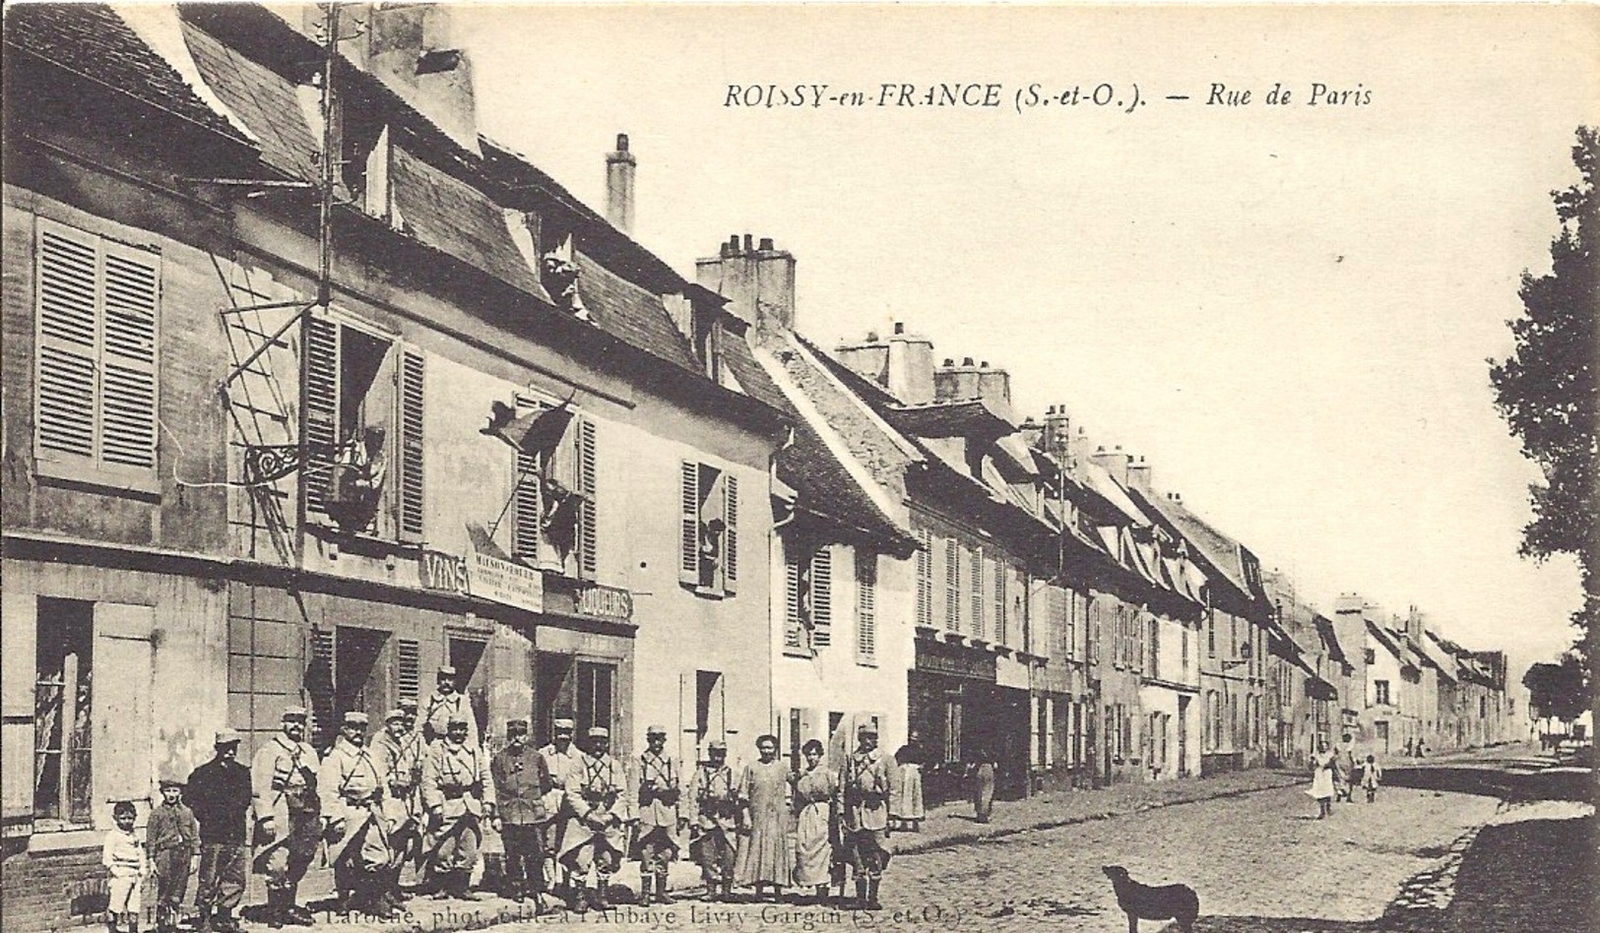 New at the store: the history of the village of Roissy-en-France through the book by Henri Houmaire